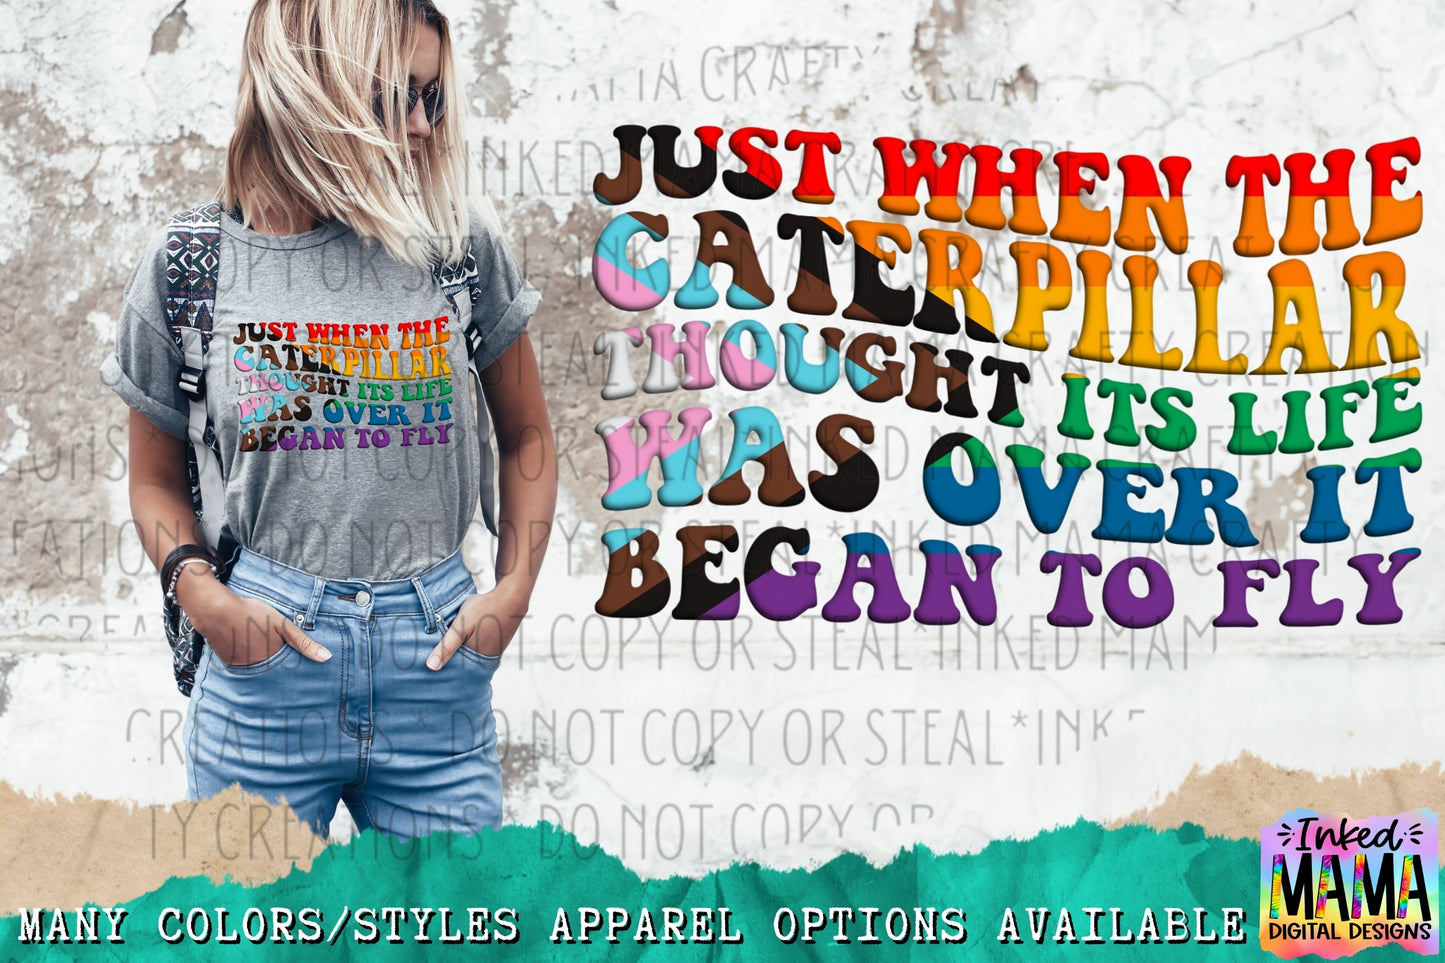 Just when the caterpillar thought its life was over it began to fly - LGBTQIA+ PRIDE Apparel